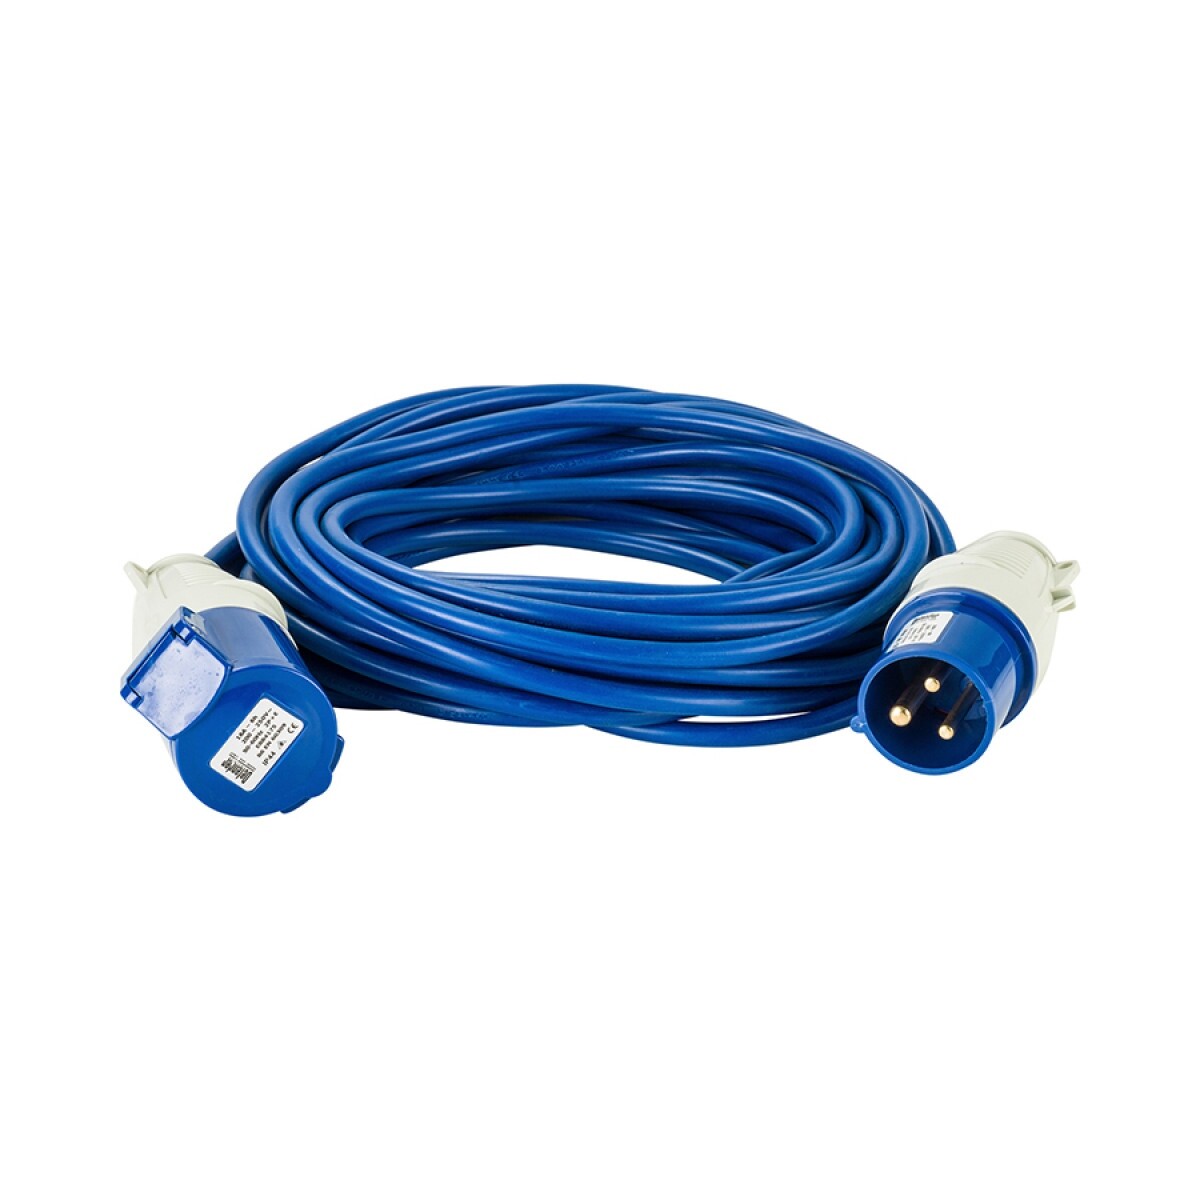 240v Industrial Commando Leads